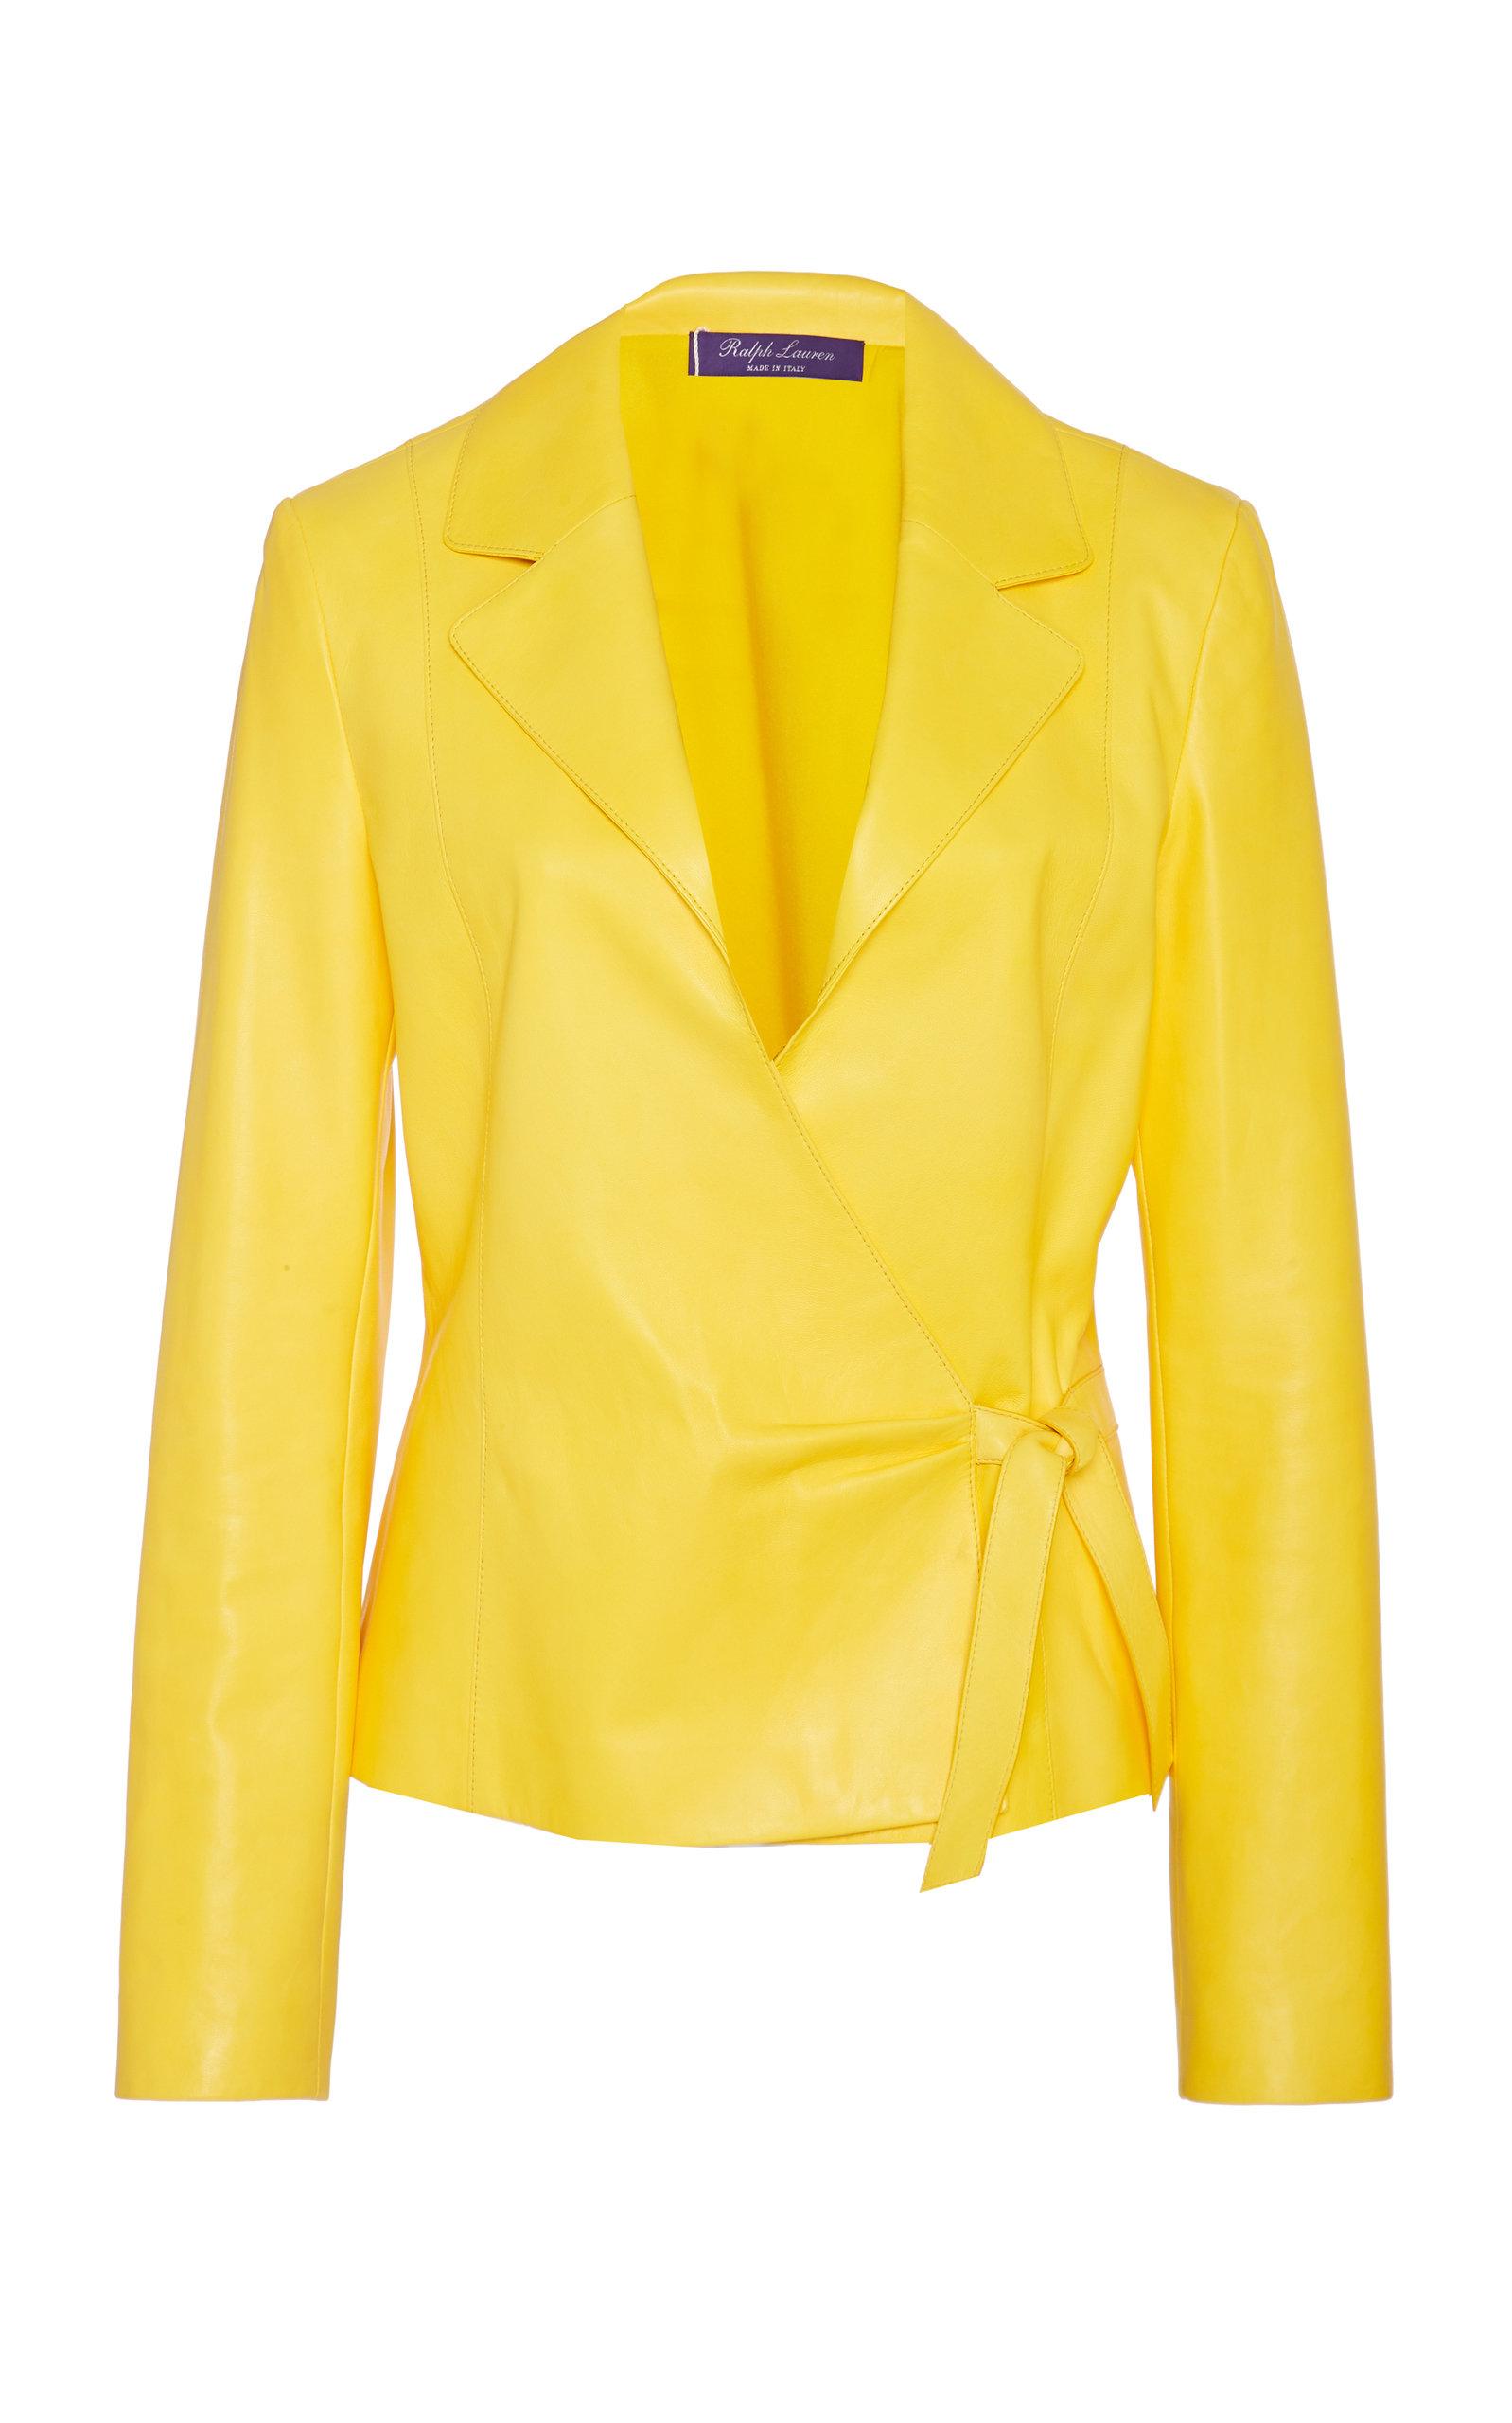 Ralph Lauren Alaina Belted Leather Jacket in Yellow - Lyst